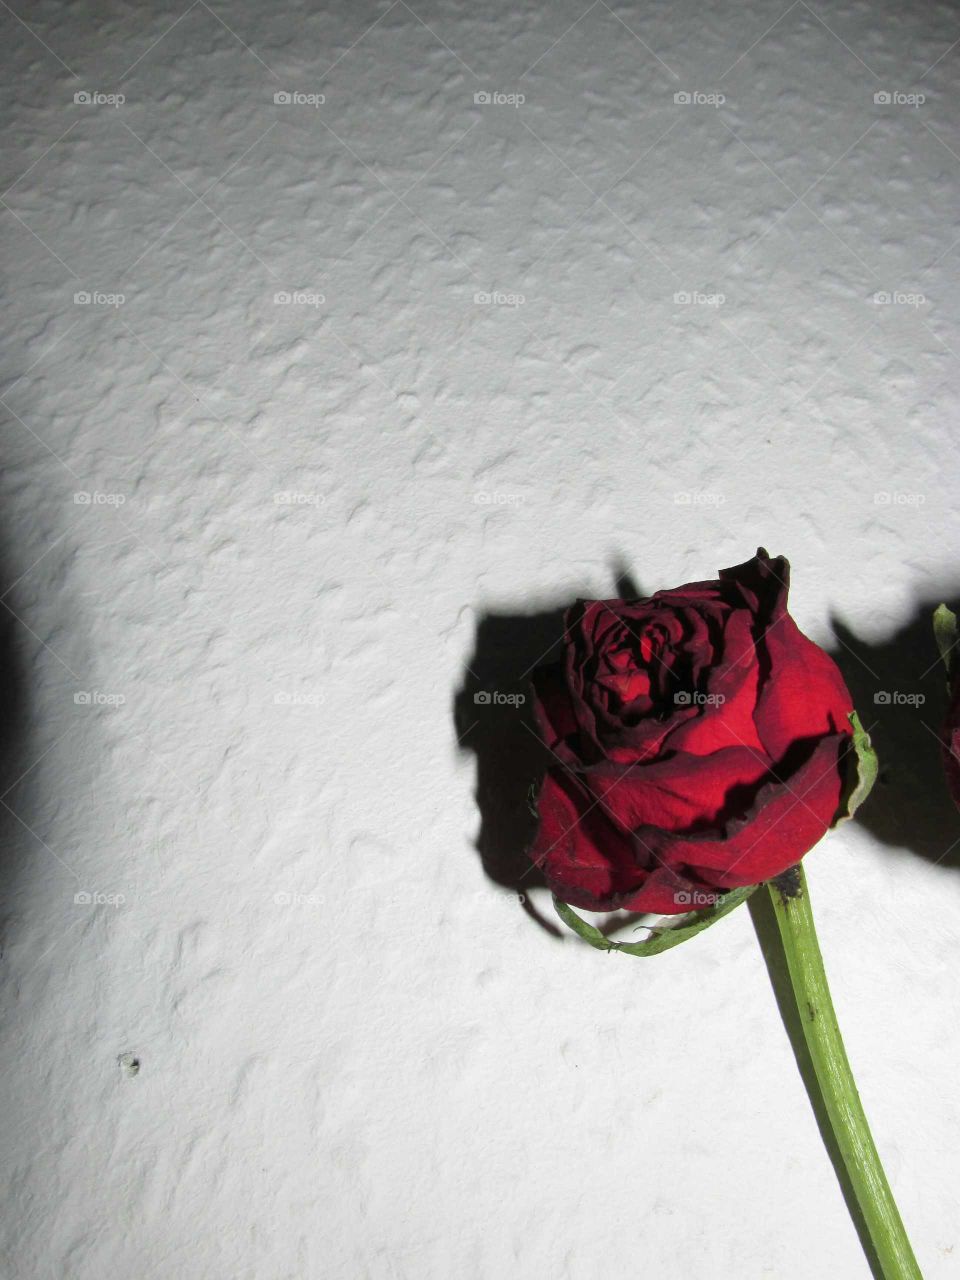 the red rose